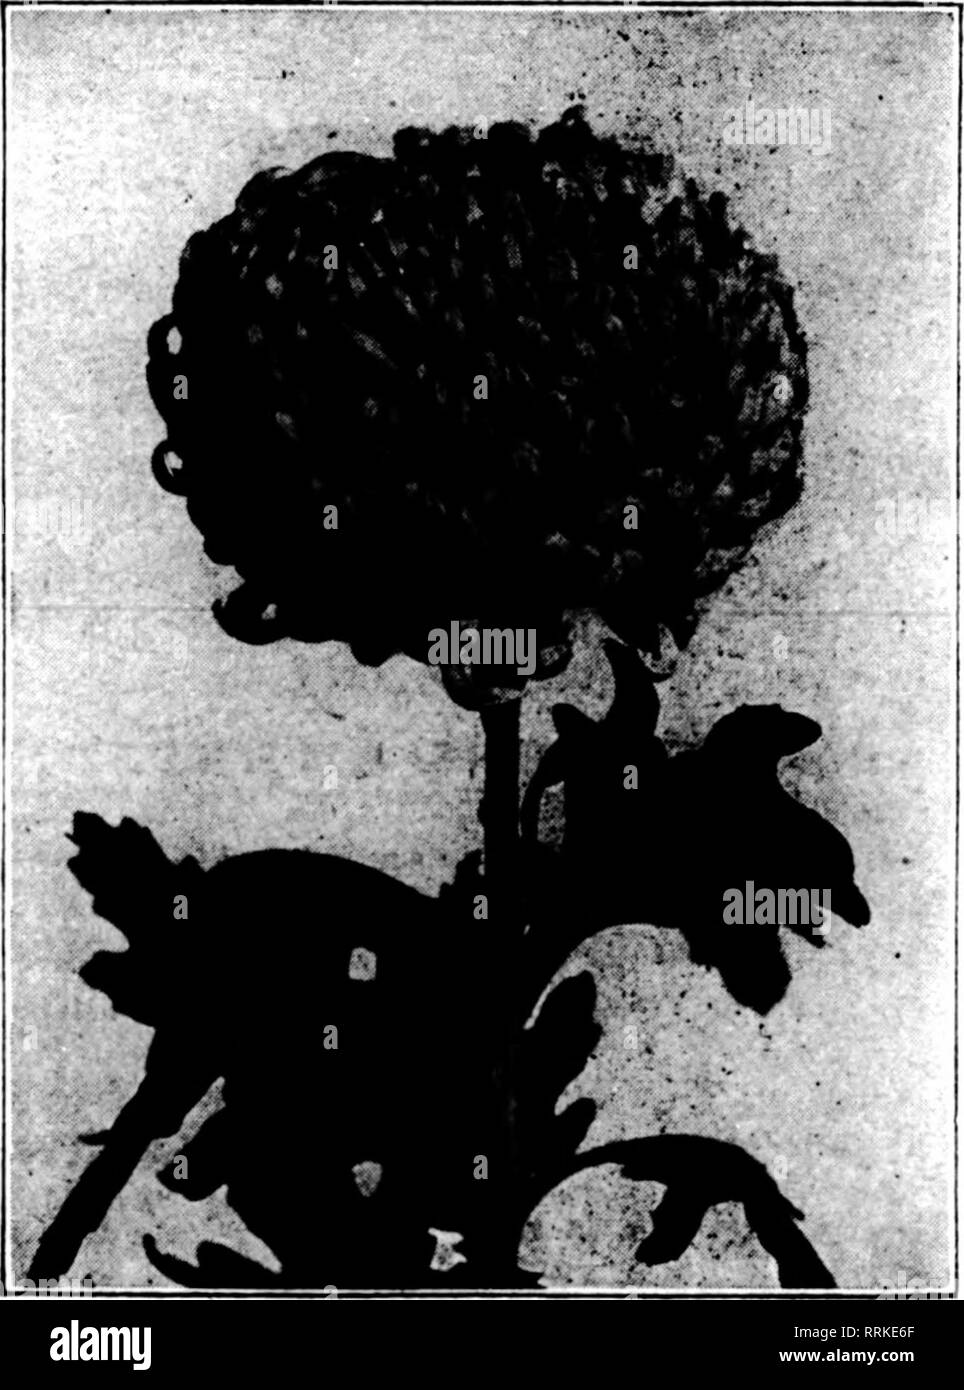 . Florists' review [microform]. Floriculture. NRS.C.C.POLLWORTH The early yellow mum that gets the money. Strong 2 ^4-inch plants, ready for immedi- ate sliipment, 25 for $4.00; $15.00 per 100 EARLY FROST, best early white, ready now. 2^4-in. pots, fine plants, $3.50 per 100, $30.00 per 1000 C. C. POLLWORTH CO. Milwaukee* Wis. FERNS, ETC. MephroleplB Teddy. Jr., 6-lnch pots, $6.00 per dozen; 8-lnch, $12.00 per dozen. Nephrolepis Smithil, 6-lnch pots, $6.00 per dozen. Nephrolepig mnacoBa, S'^-lnch, $3.00 per dozen. Flcng elastica, 60c, 76c and $1.00 each. F. R. PIERSON CO. TABBYTOWN. HEW YORK R Stock Photo